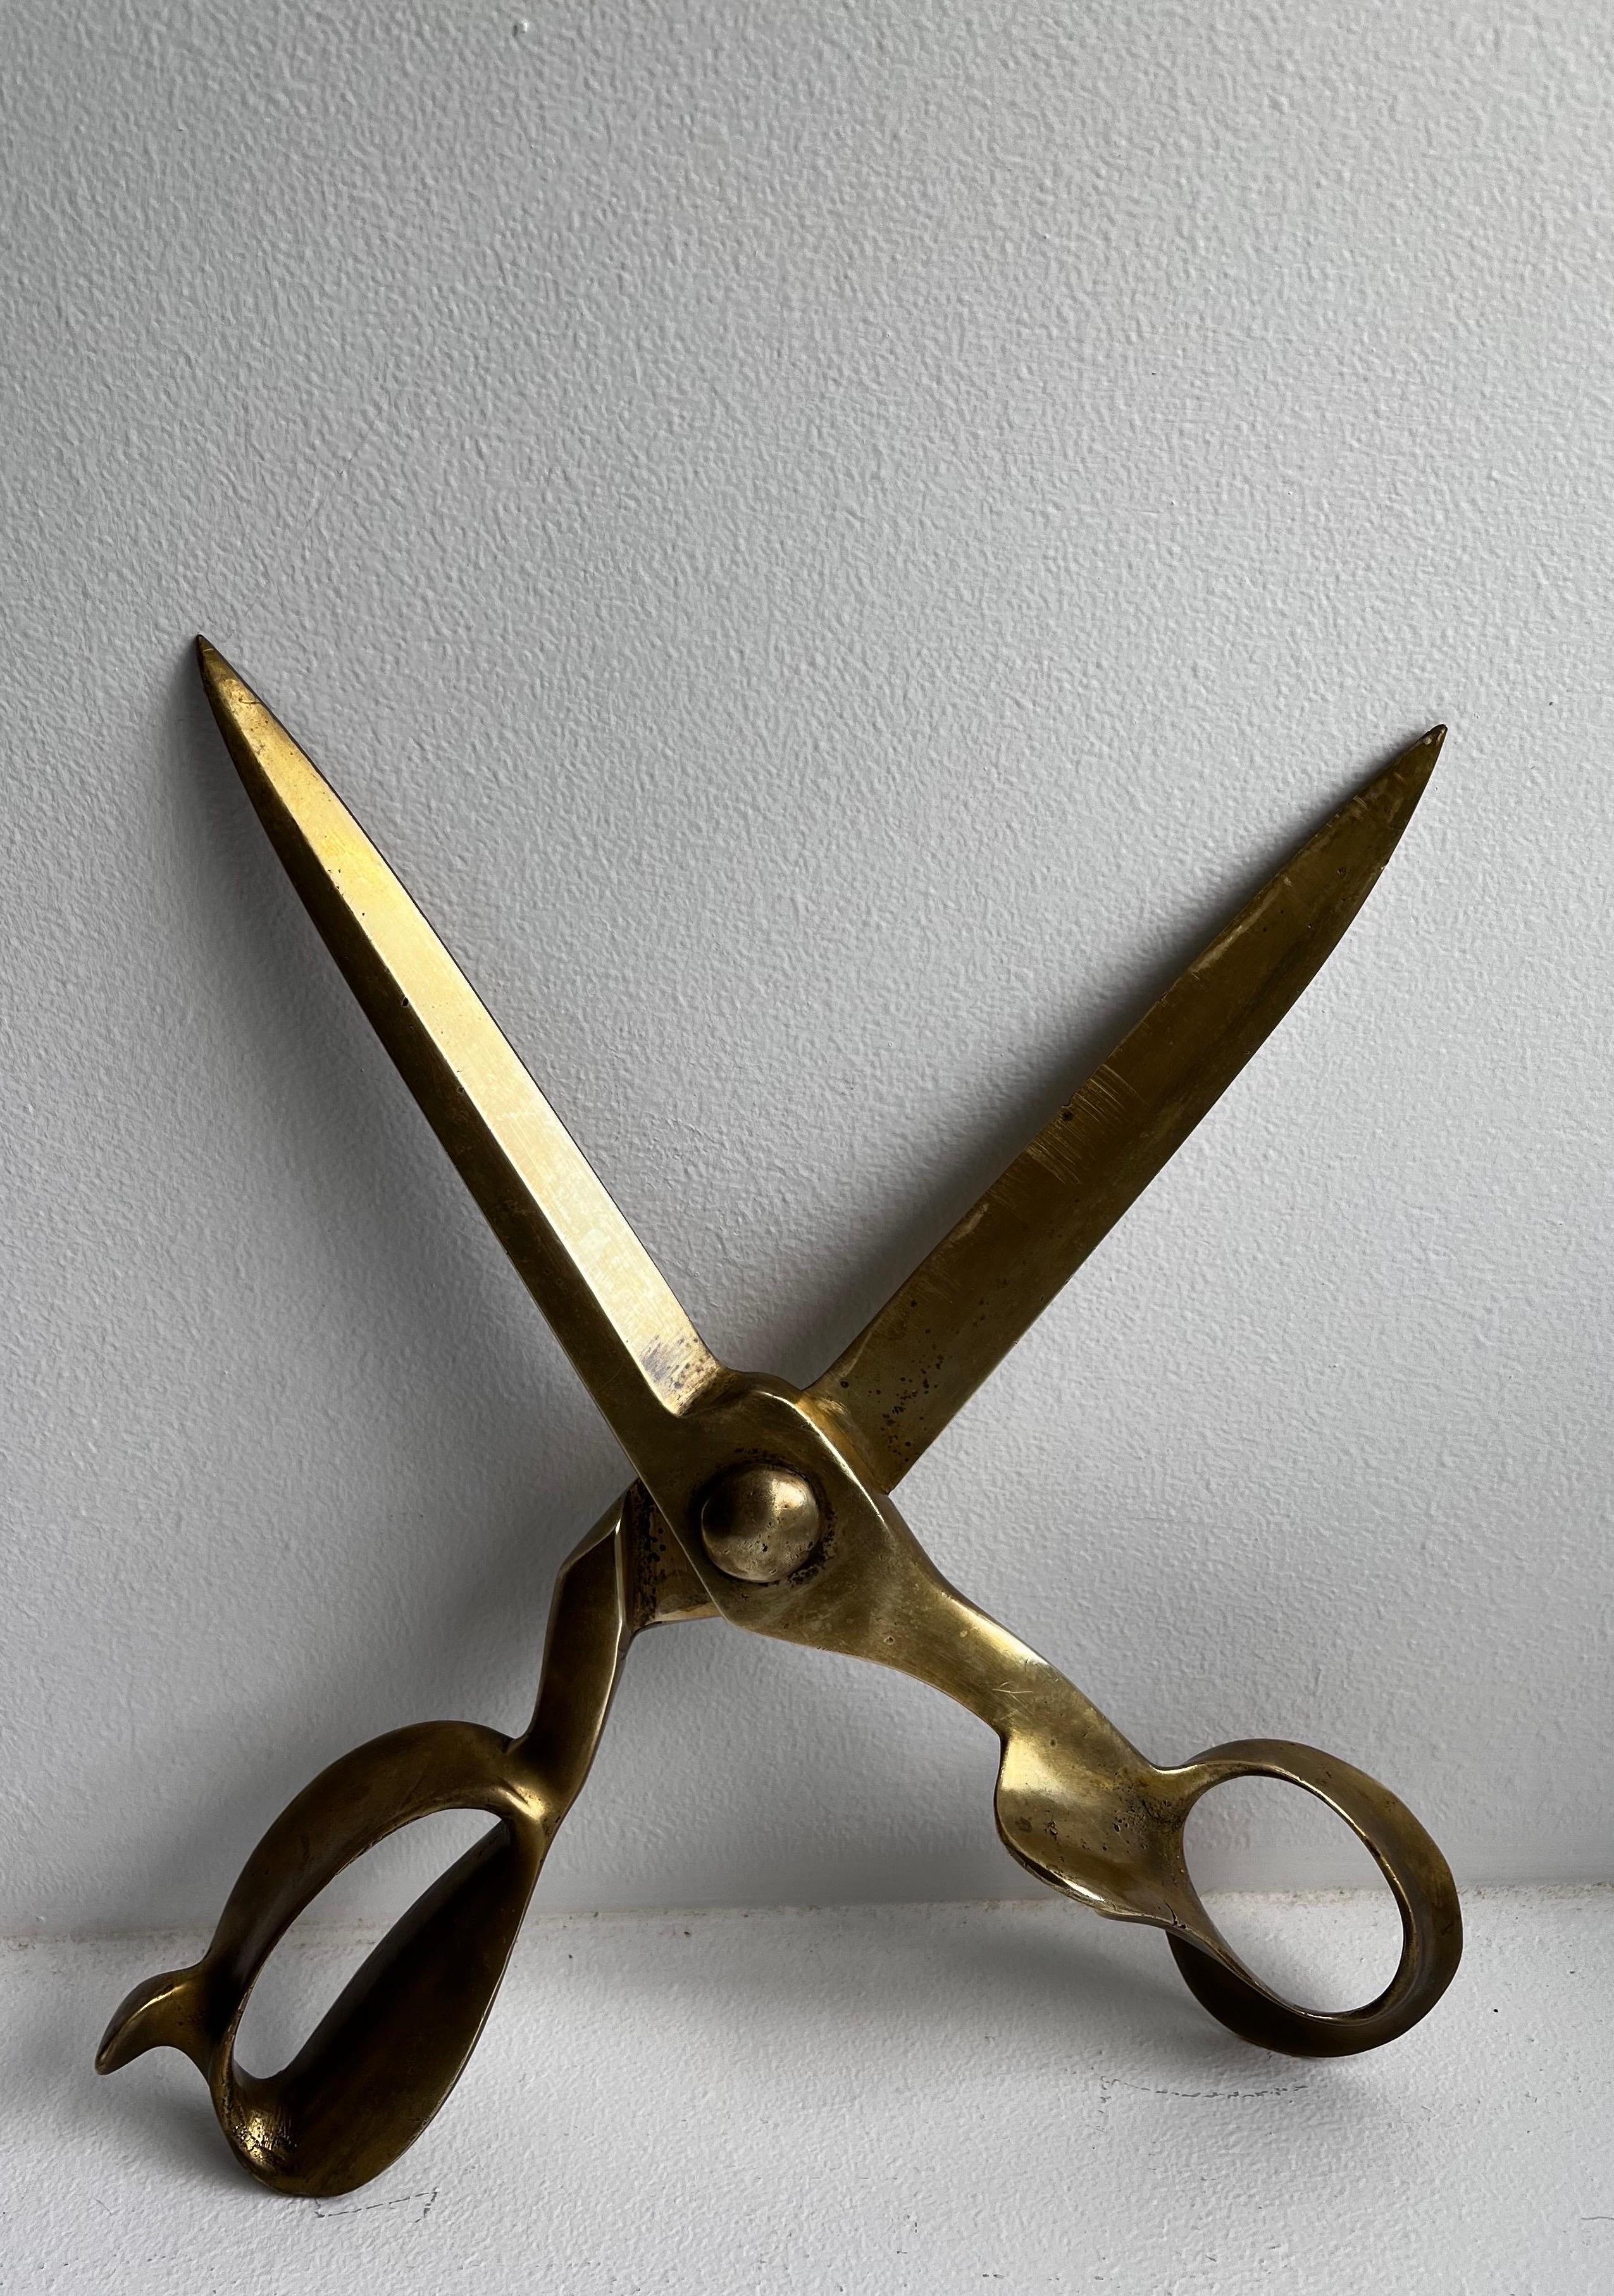 Oversized Advertising Store Display Scissors In Good Condition For Sale In Philadelphia, PA